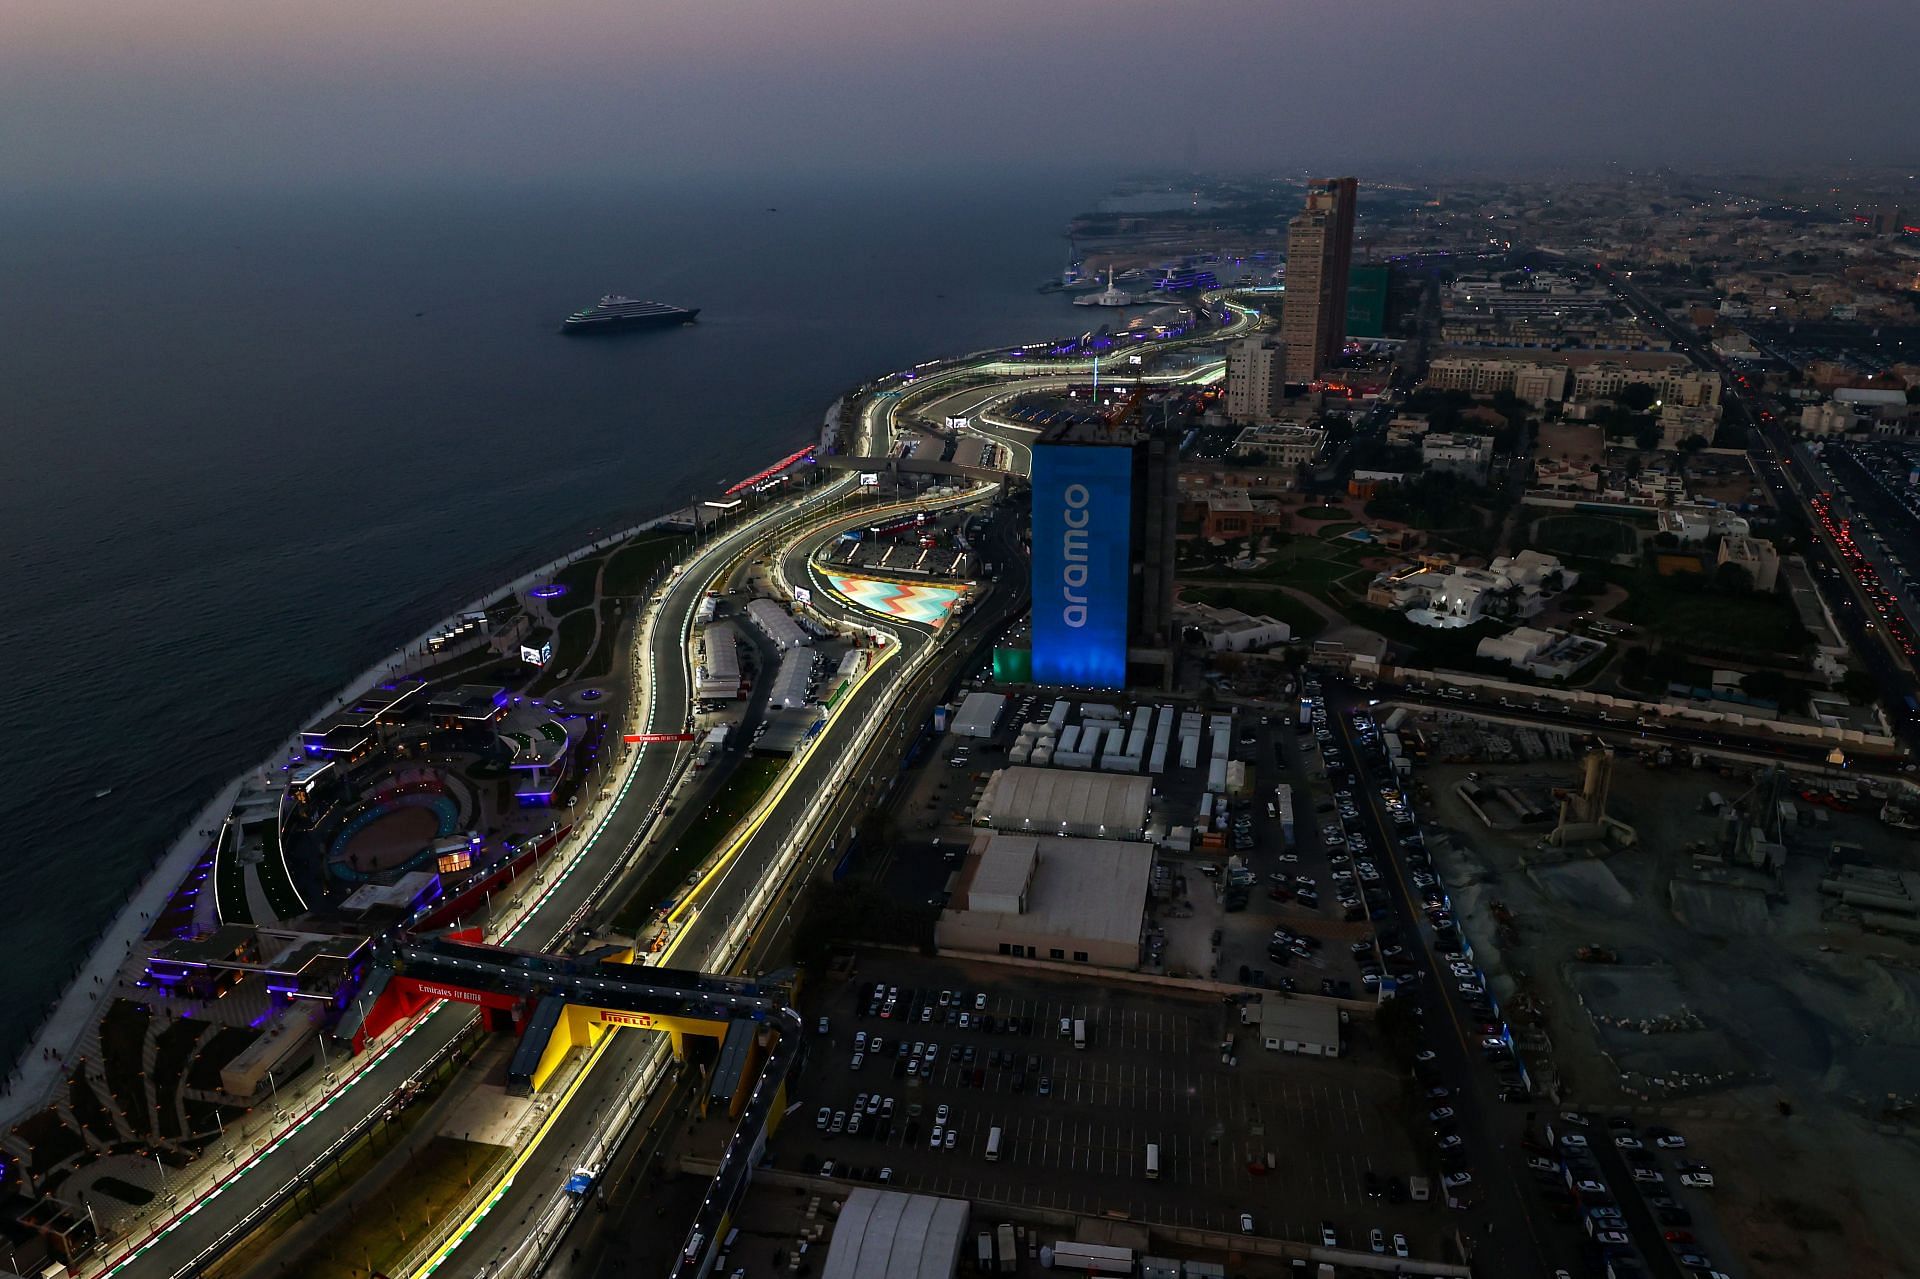 A general view of the Jeddah Corniche circuit during its inaugural F1 race (Photo by Mark Thompson/Getty Images)